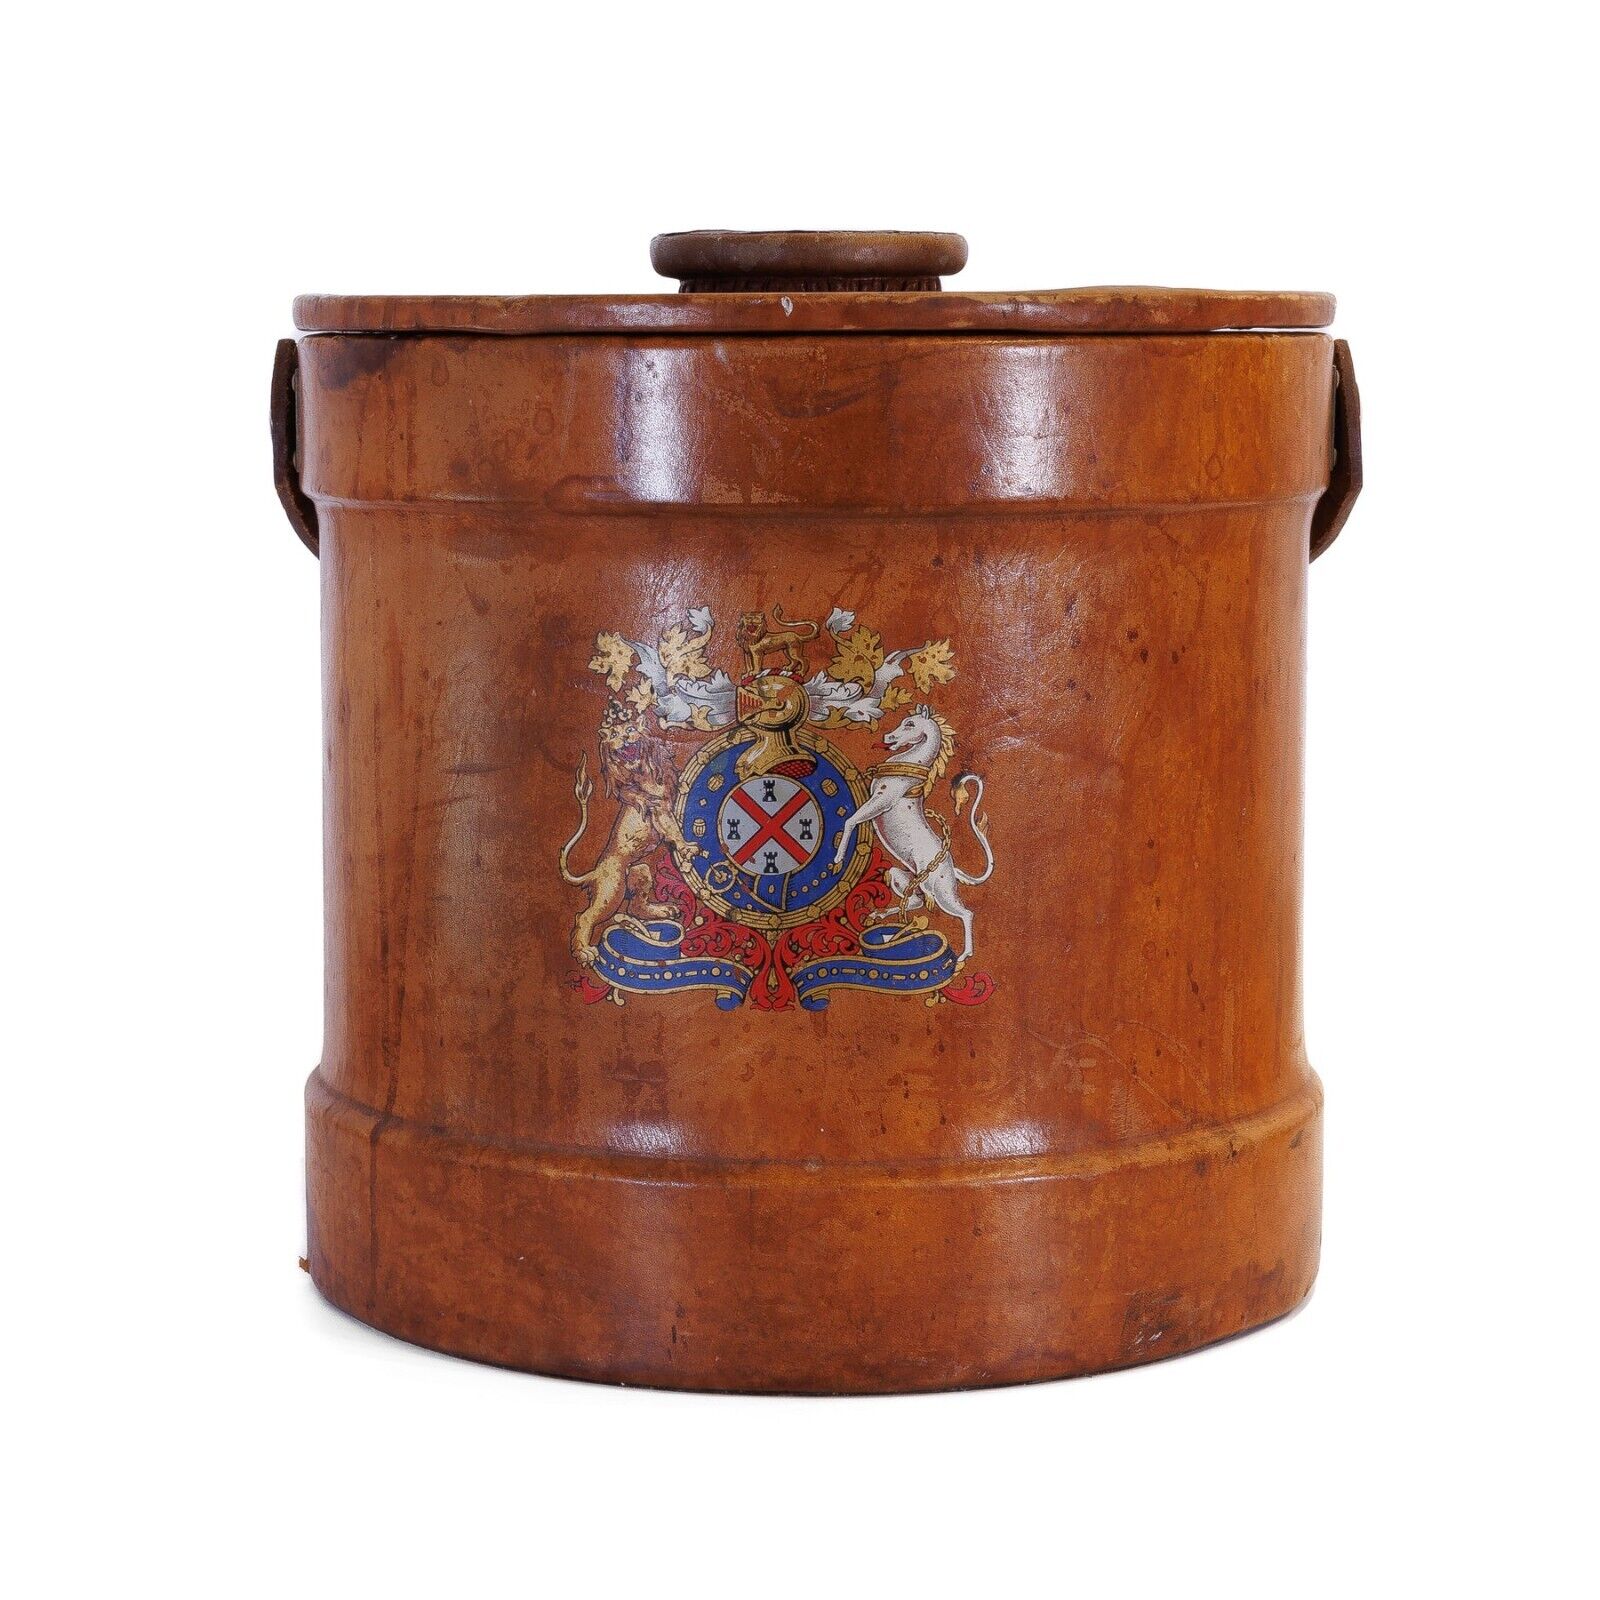 Massive Antique Leather Ice Bucket with Royal Coat of Arms